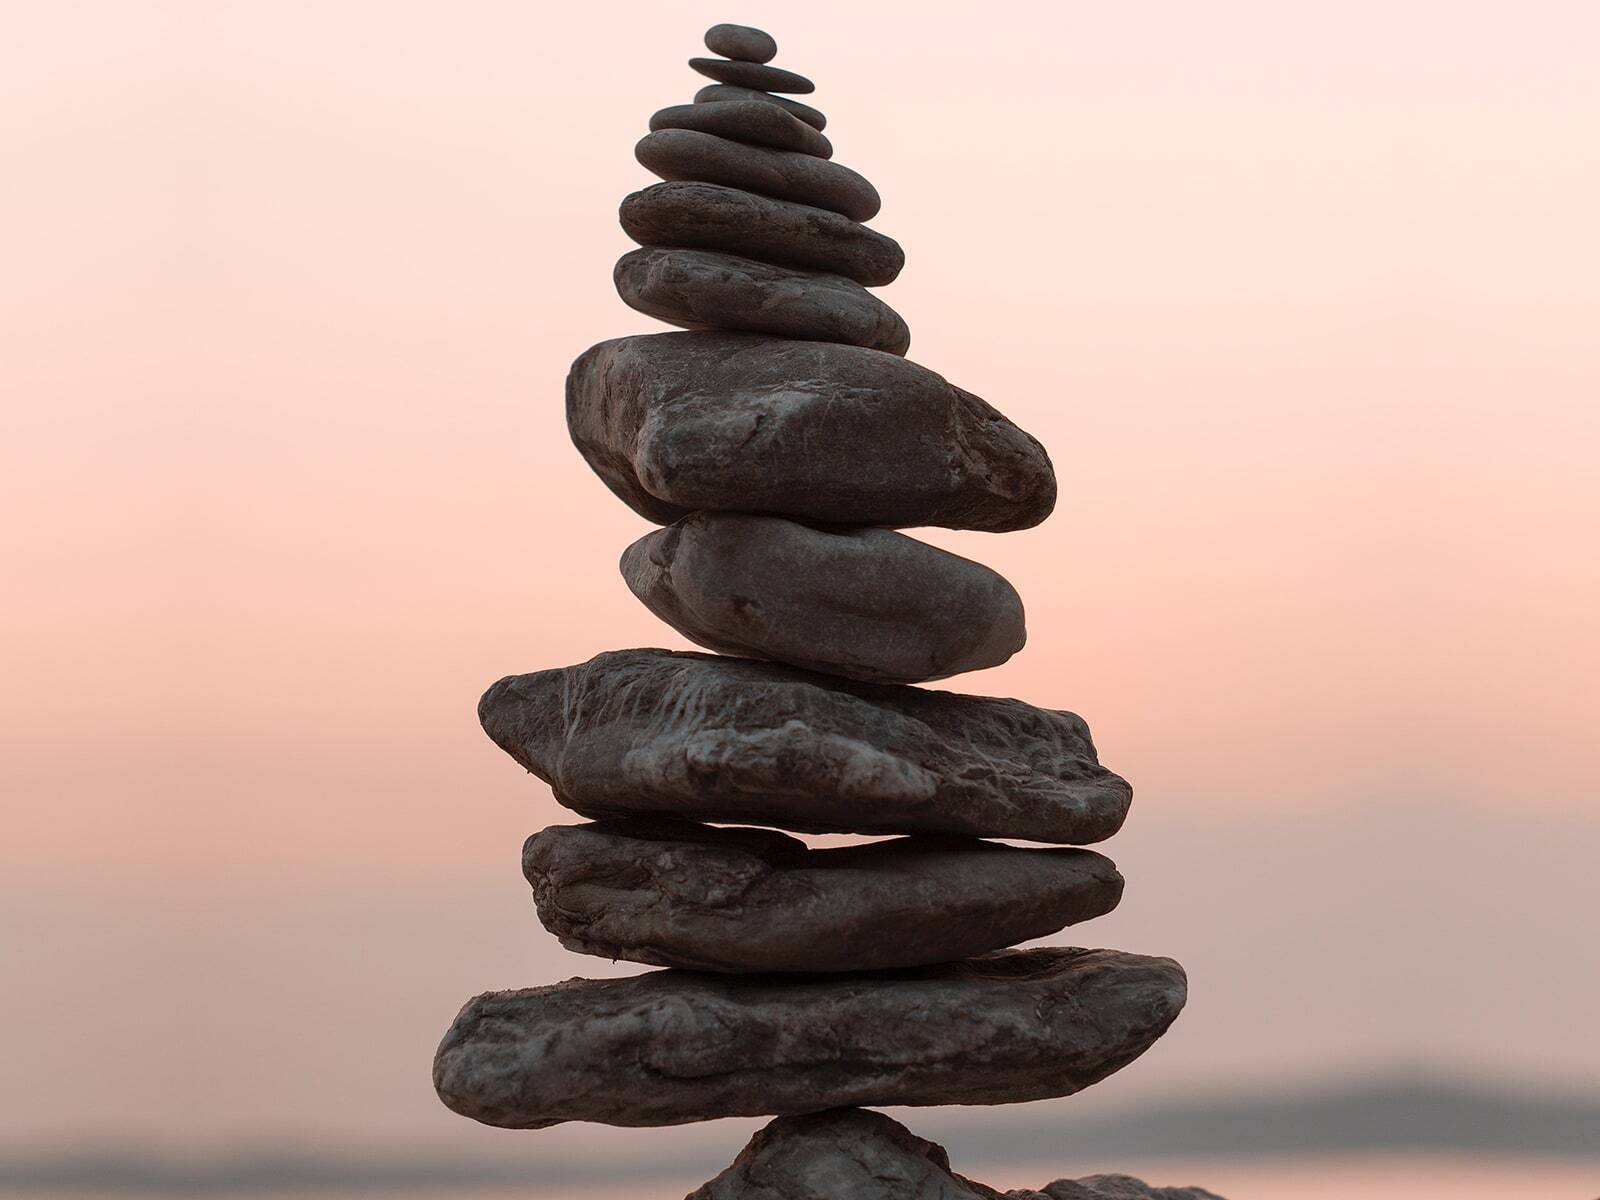 stack of balancing stones during a pink sunset